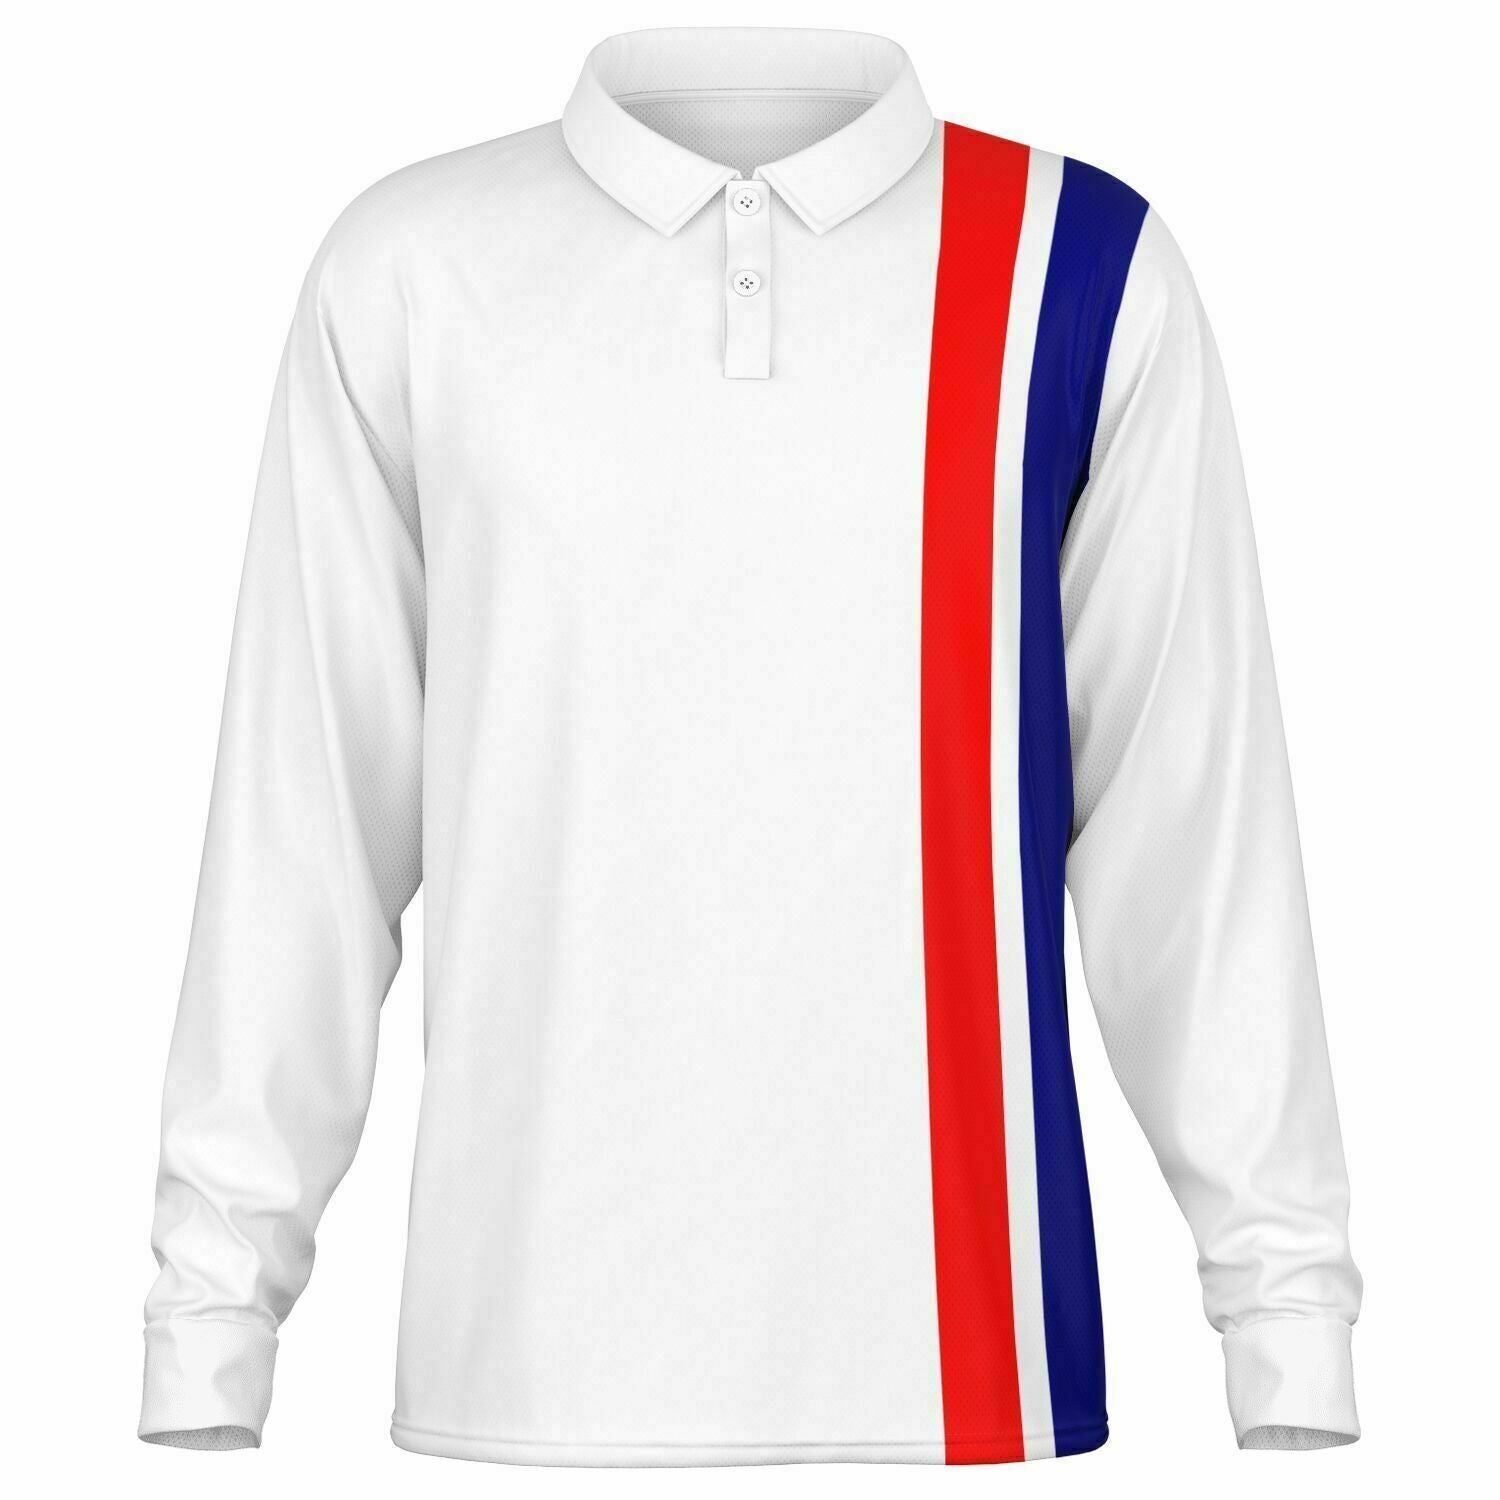 Escape To Victory Inspired White Top